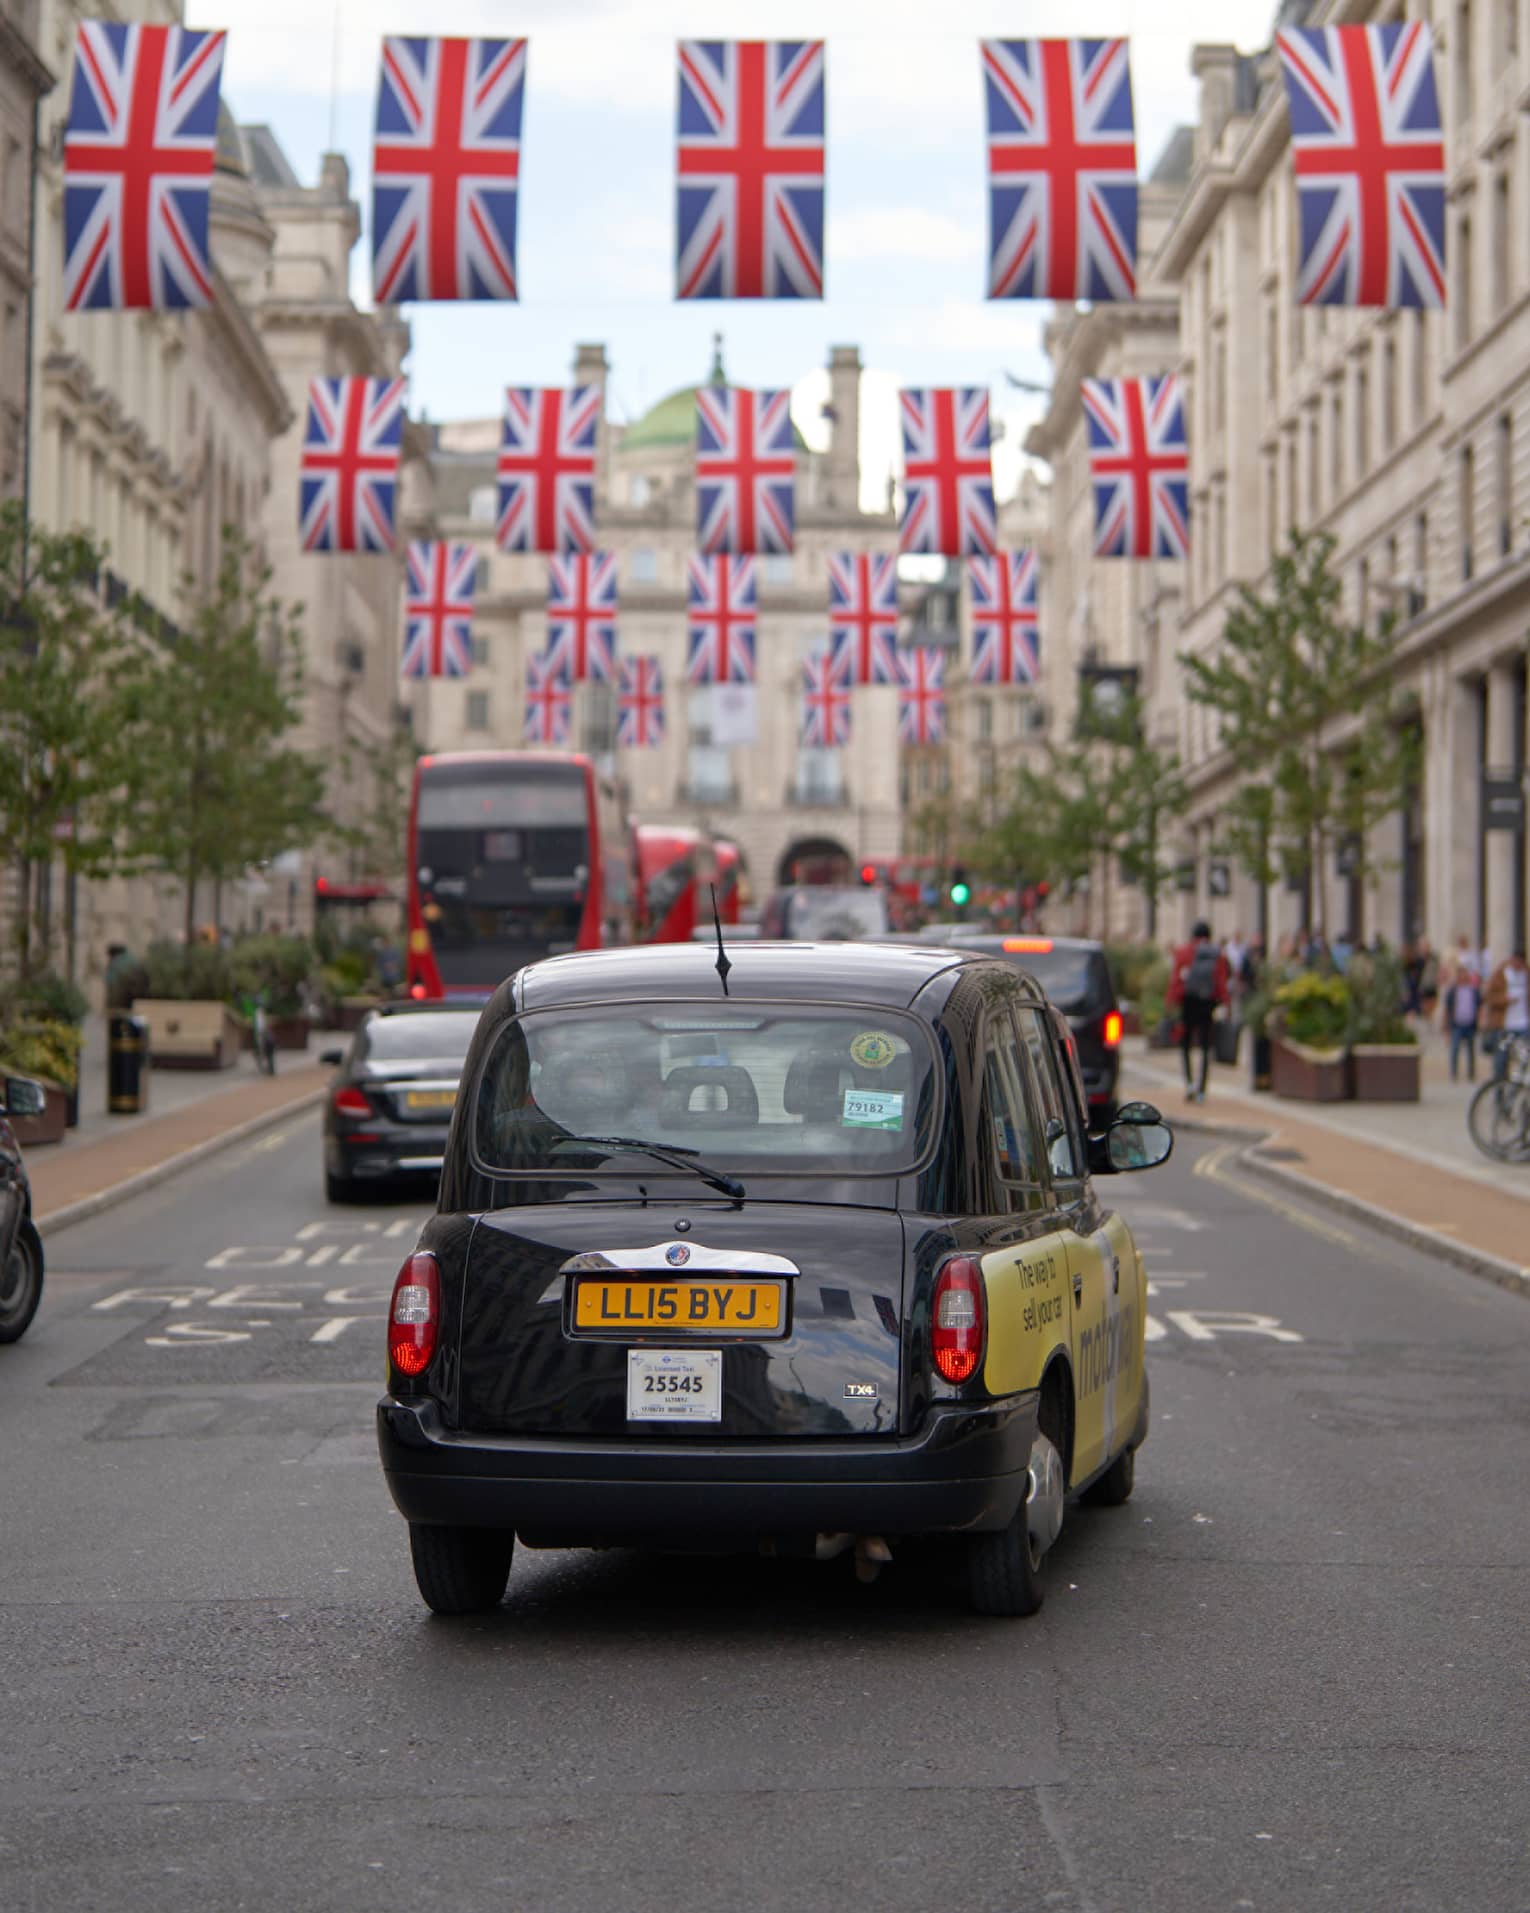 Rear view of London-style black cab, double-decker buses and other cars on road strung across with rows of Union Jack flags.